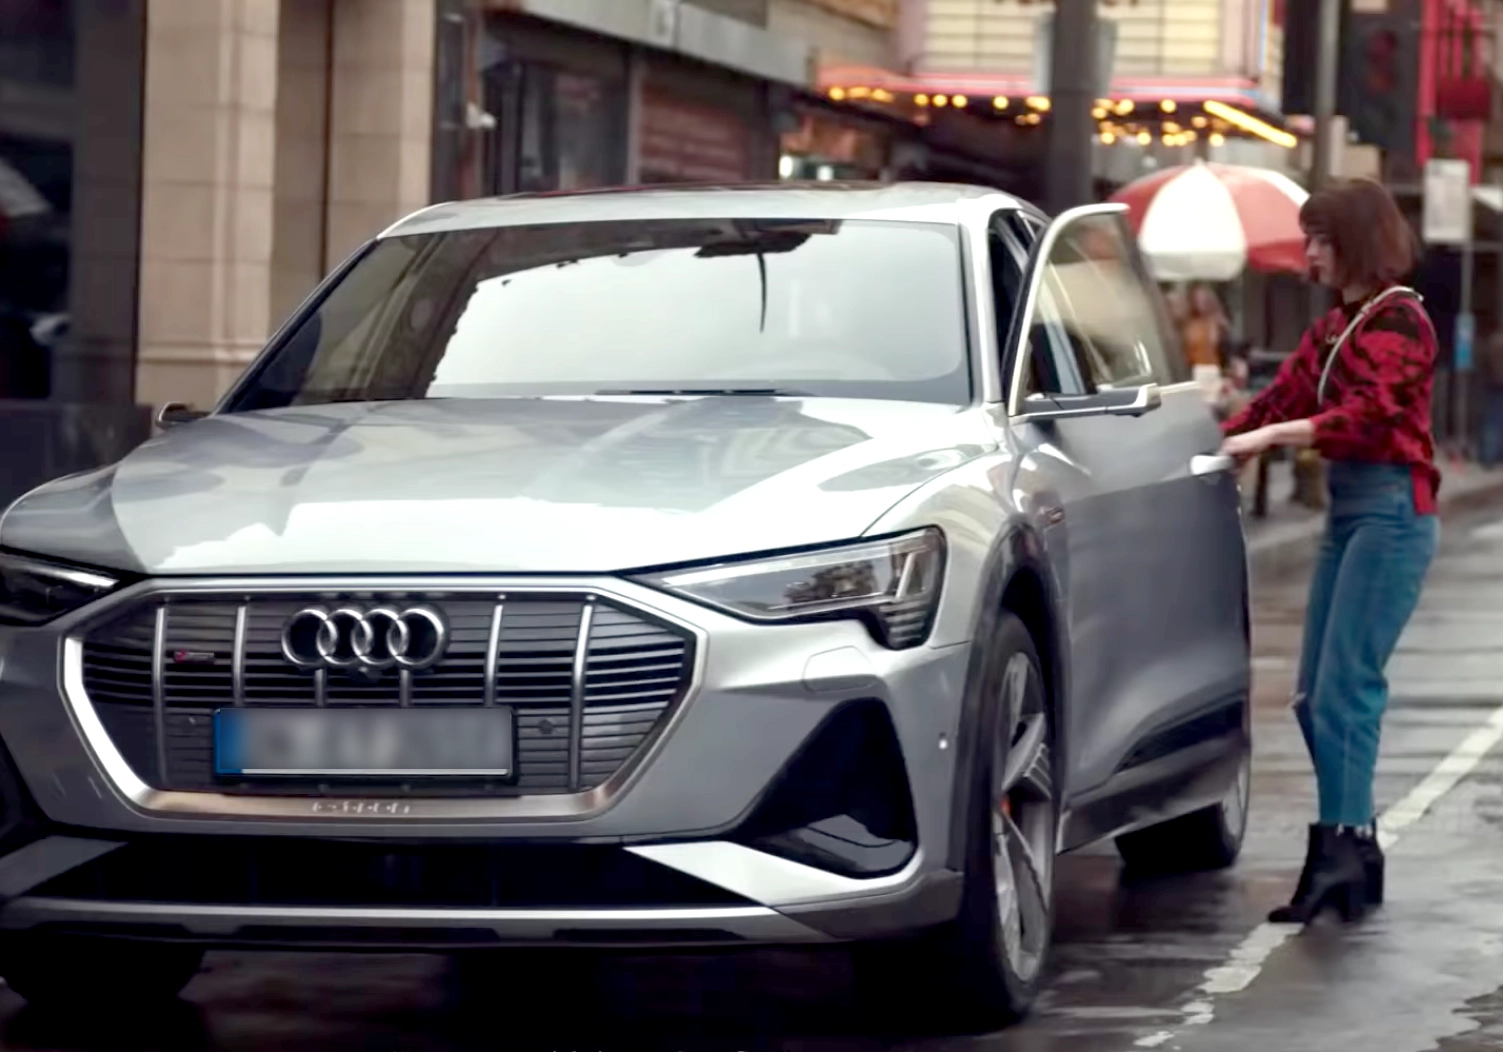 A woman is standing next to a silver Audi SUV, oblivious to one of the biggest marketing fails in recent memory.